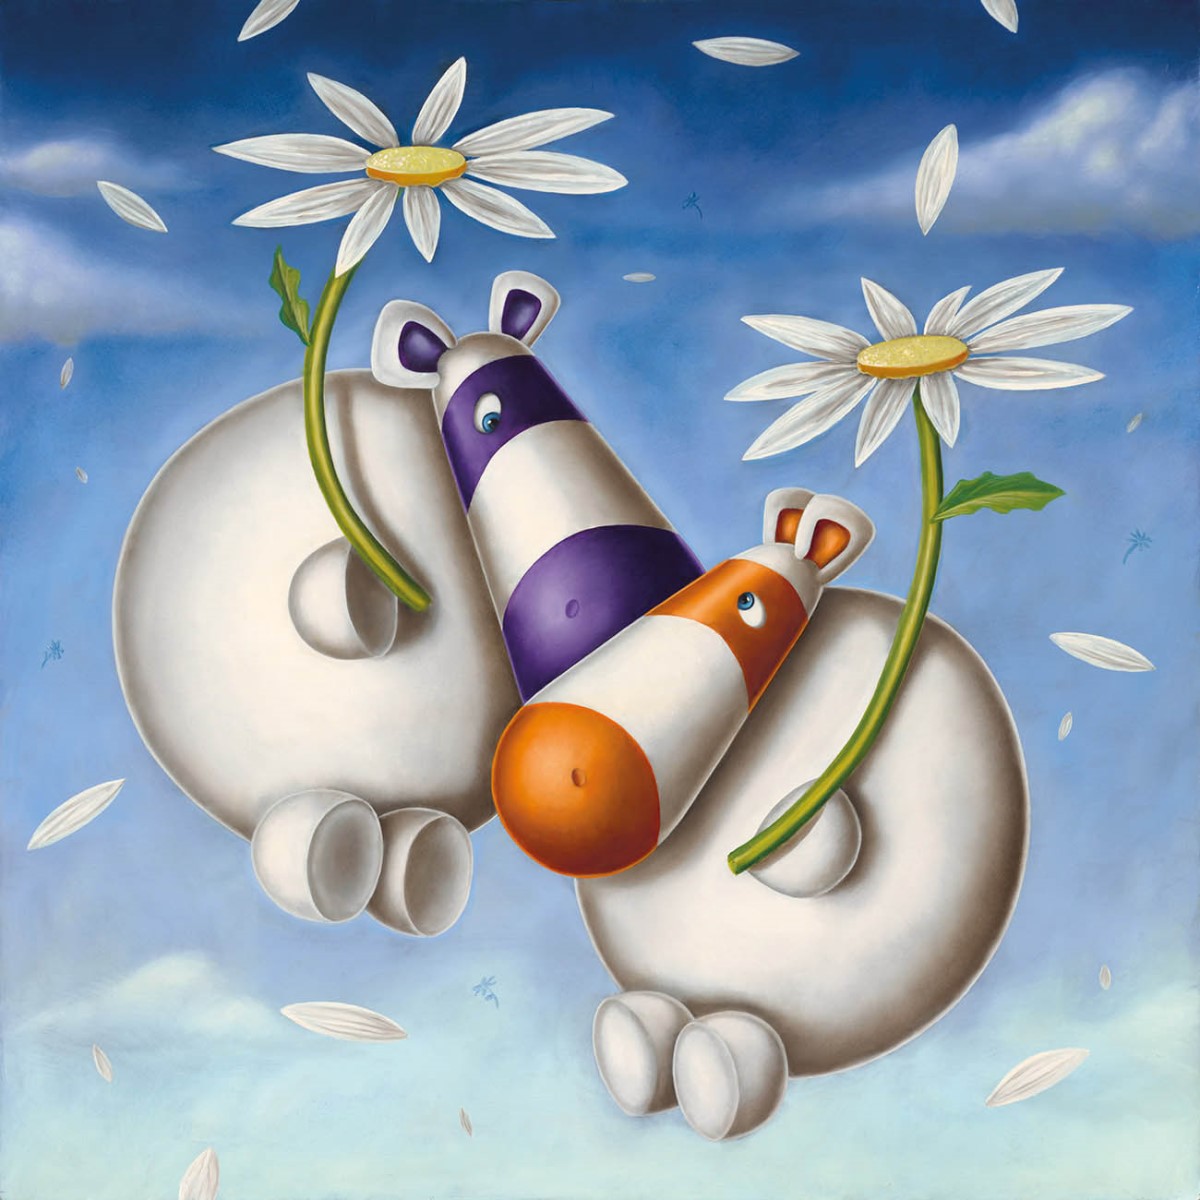 Your Love Lifts me Higher by Peter Smith, Couple | Love | Romance